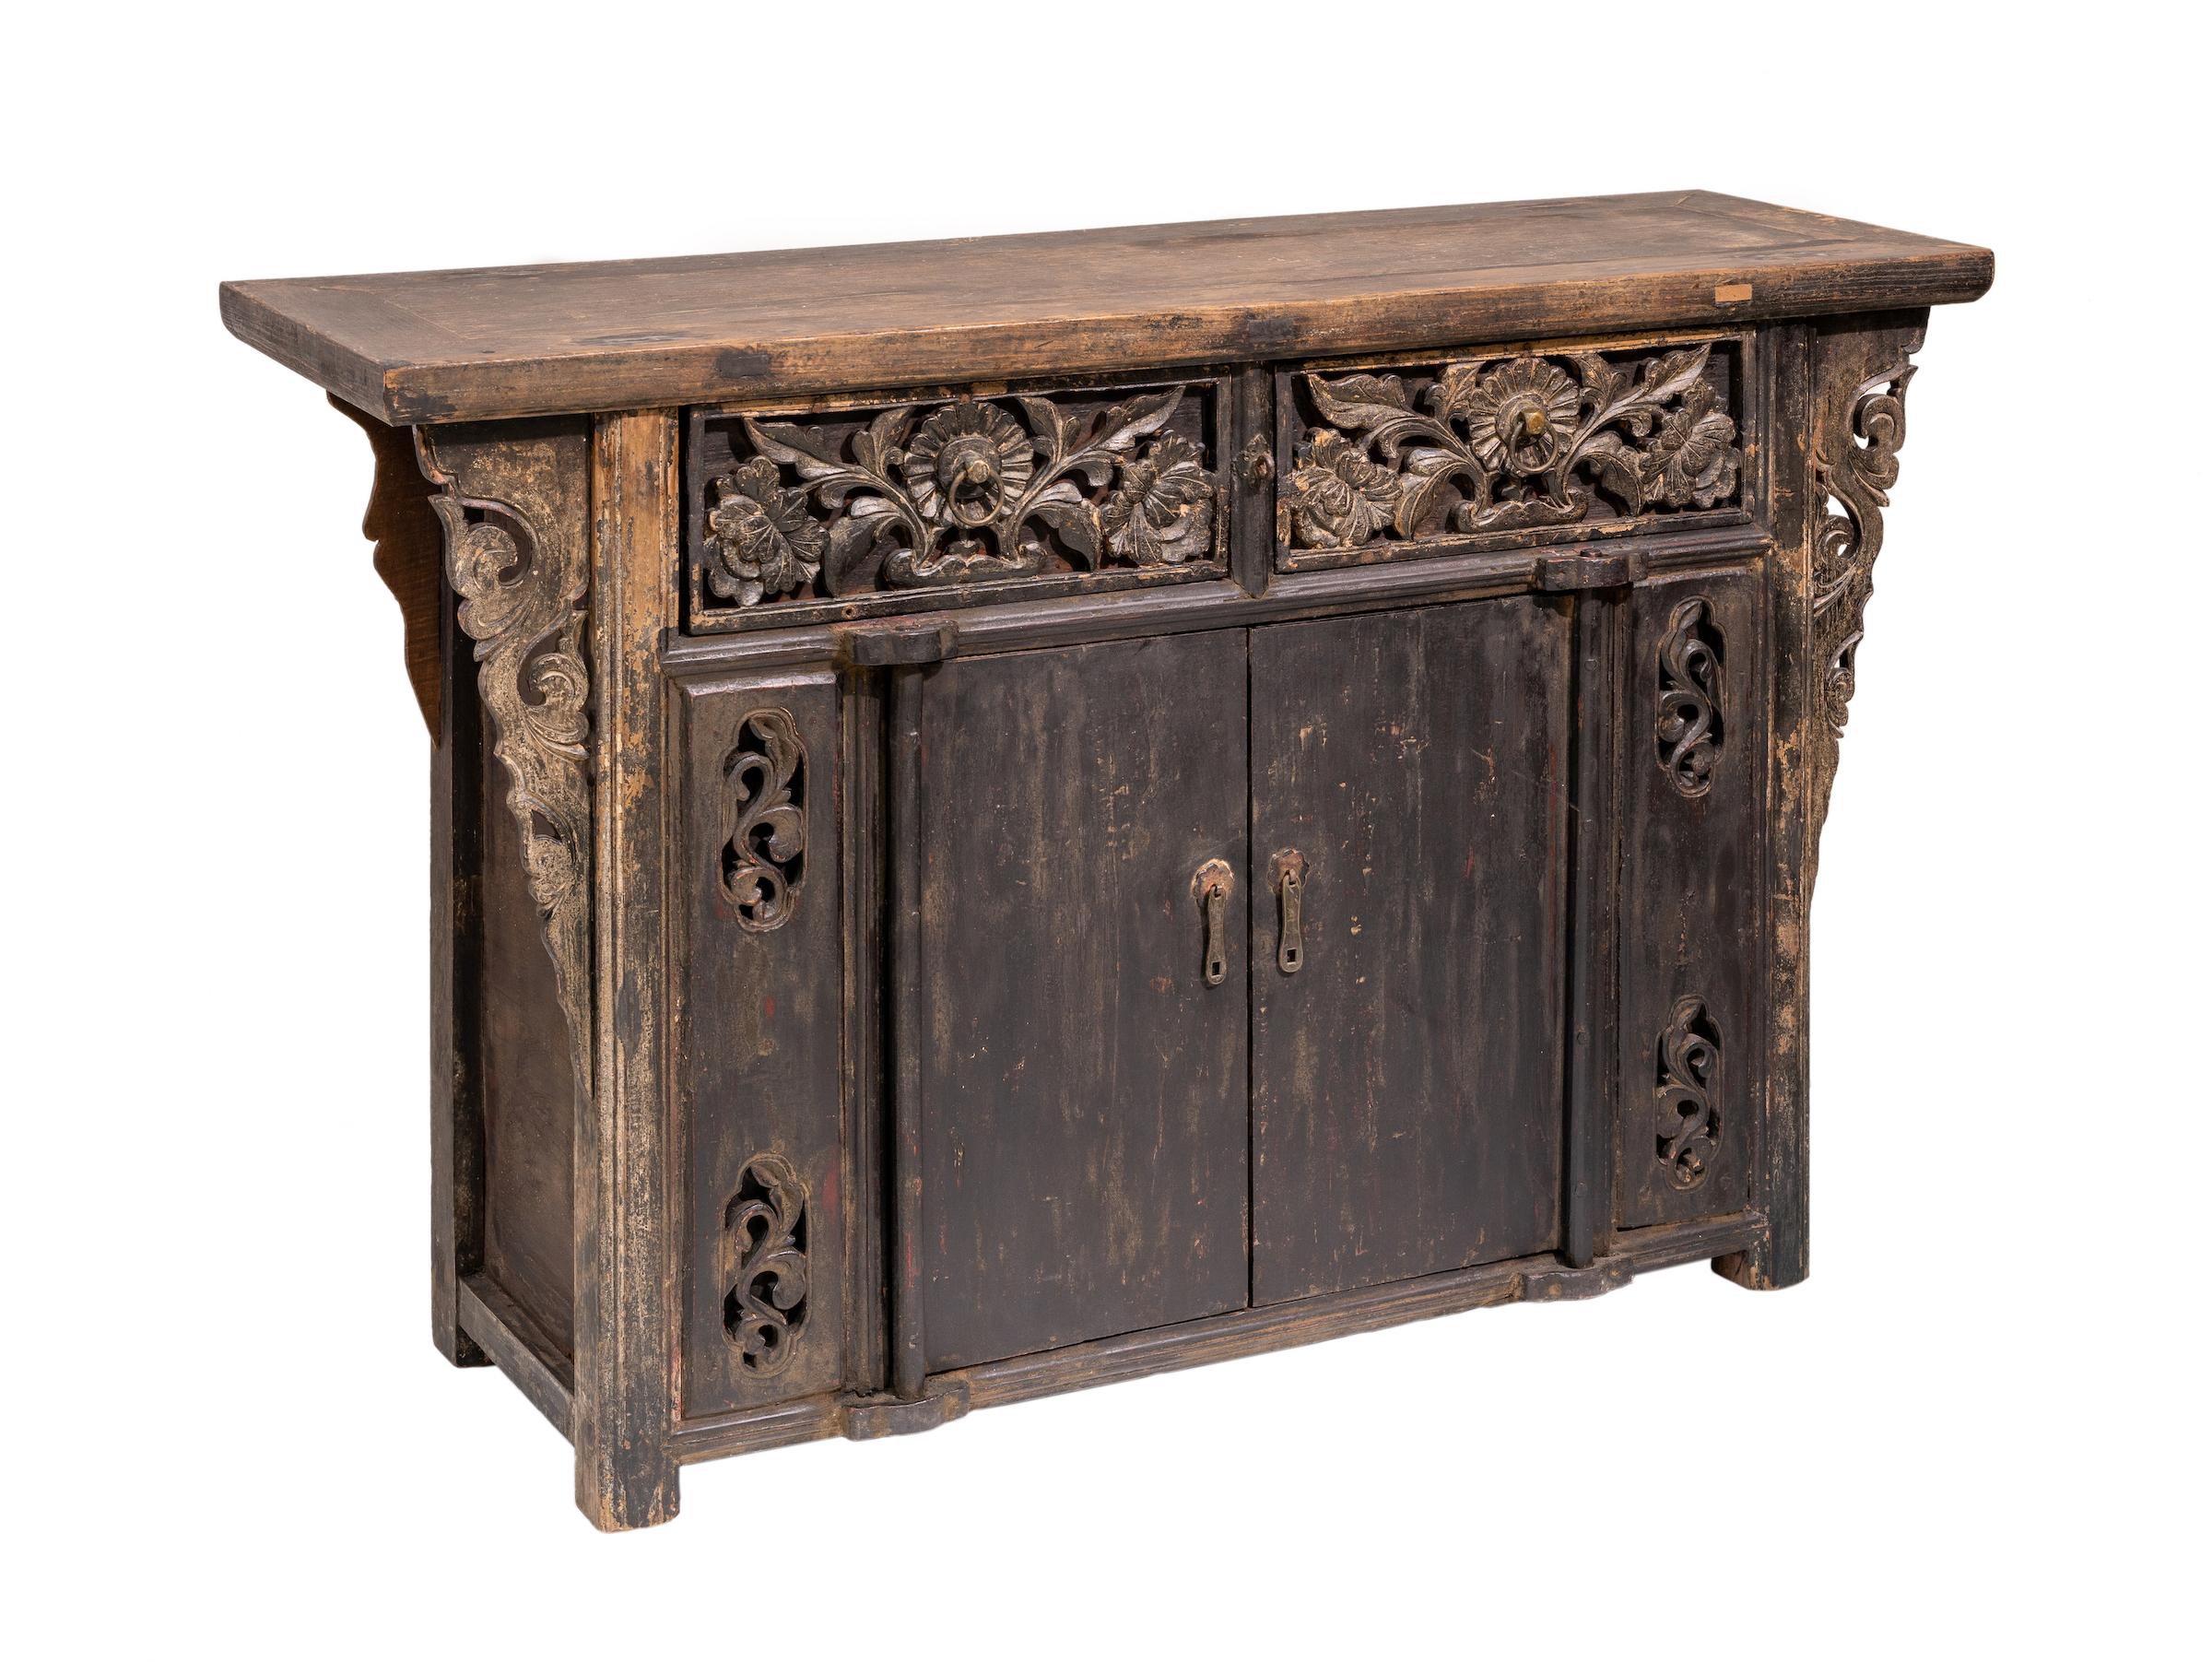 Qing Mid-19th Century Carved Cabinet from Shanxi, China